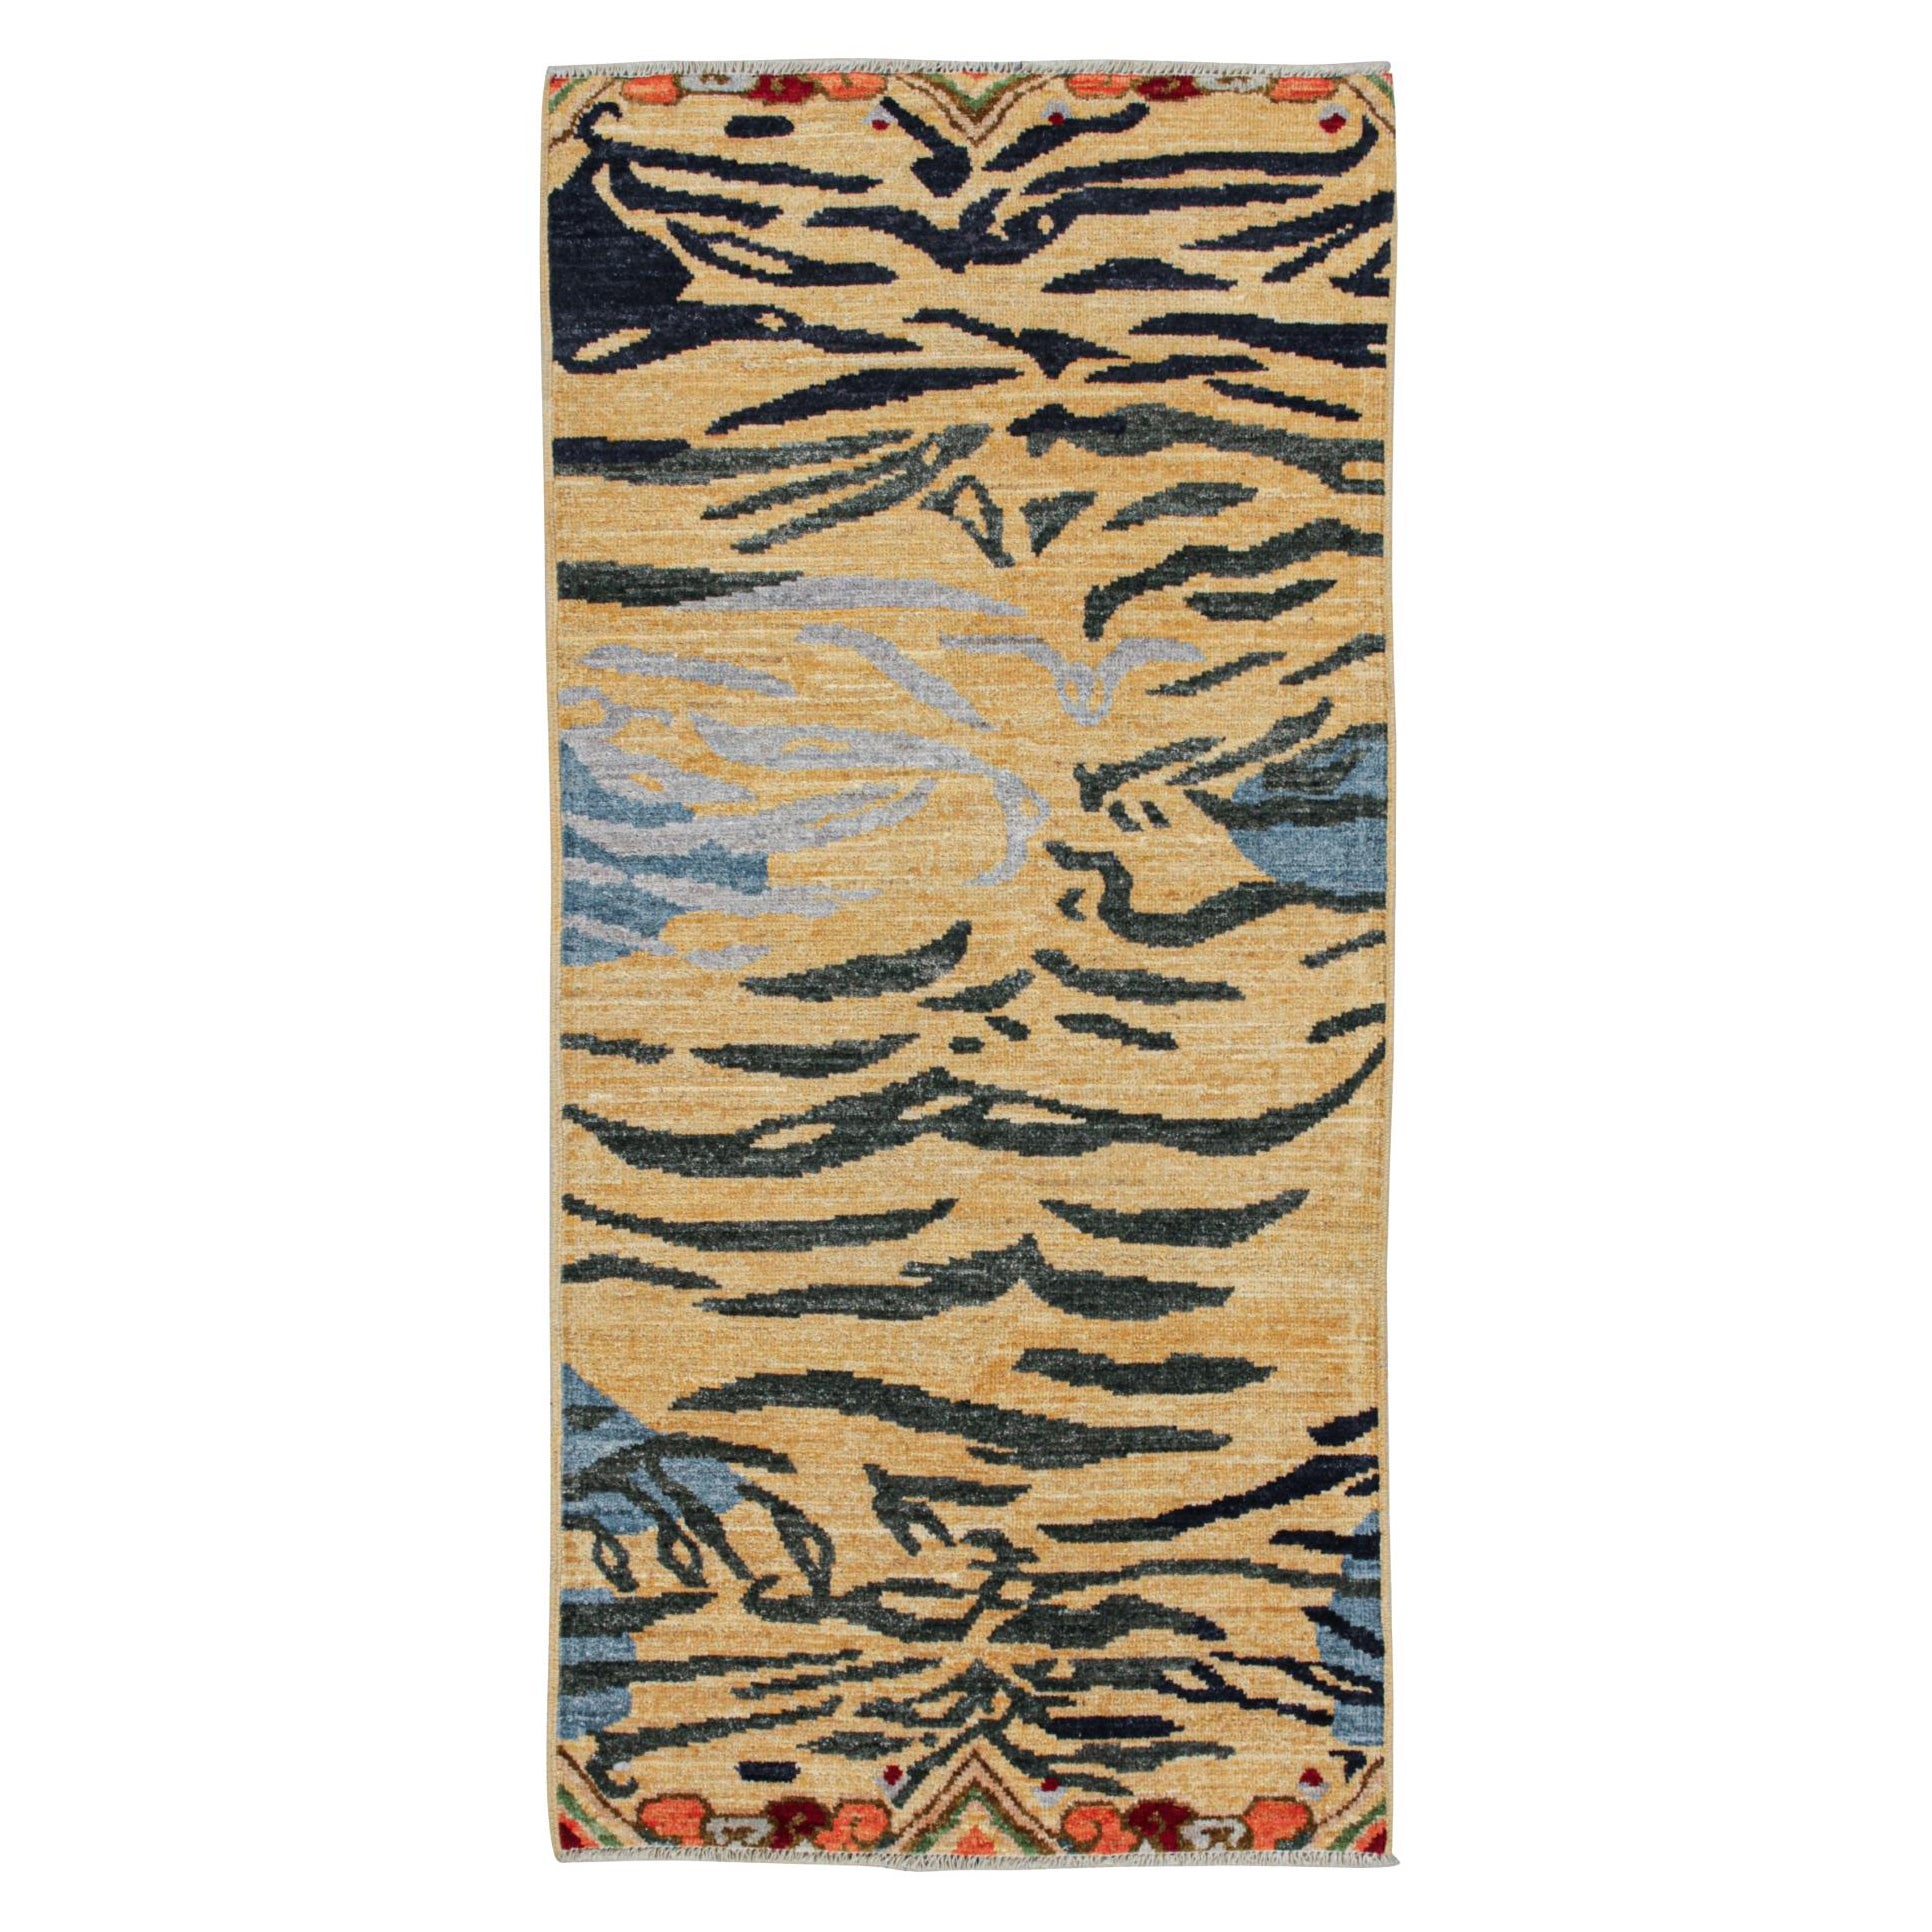 Rug & Kilim’s Classic Style Tiger-Skin Runner in Gold with Gray and Blue Stripes